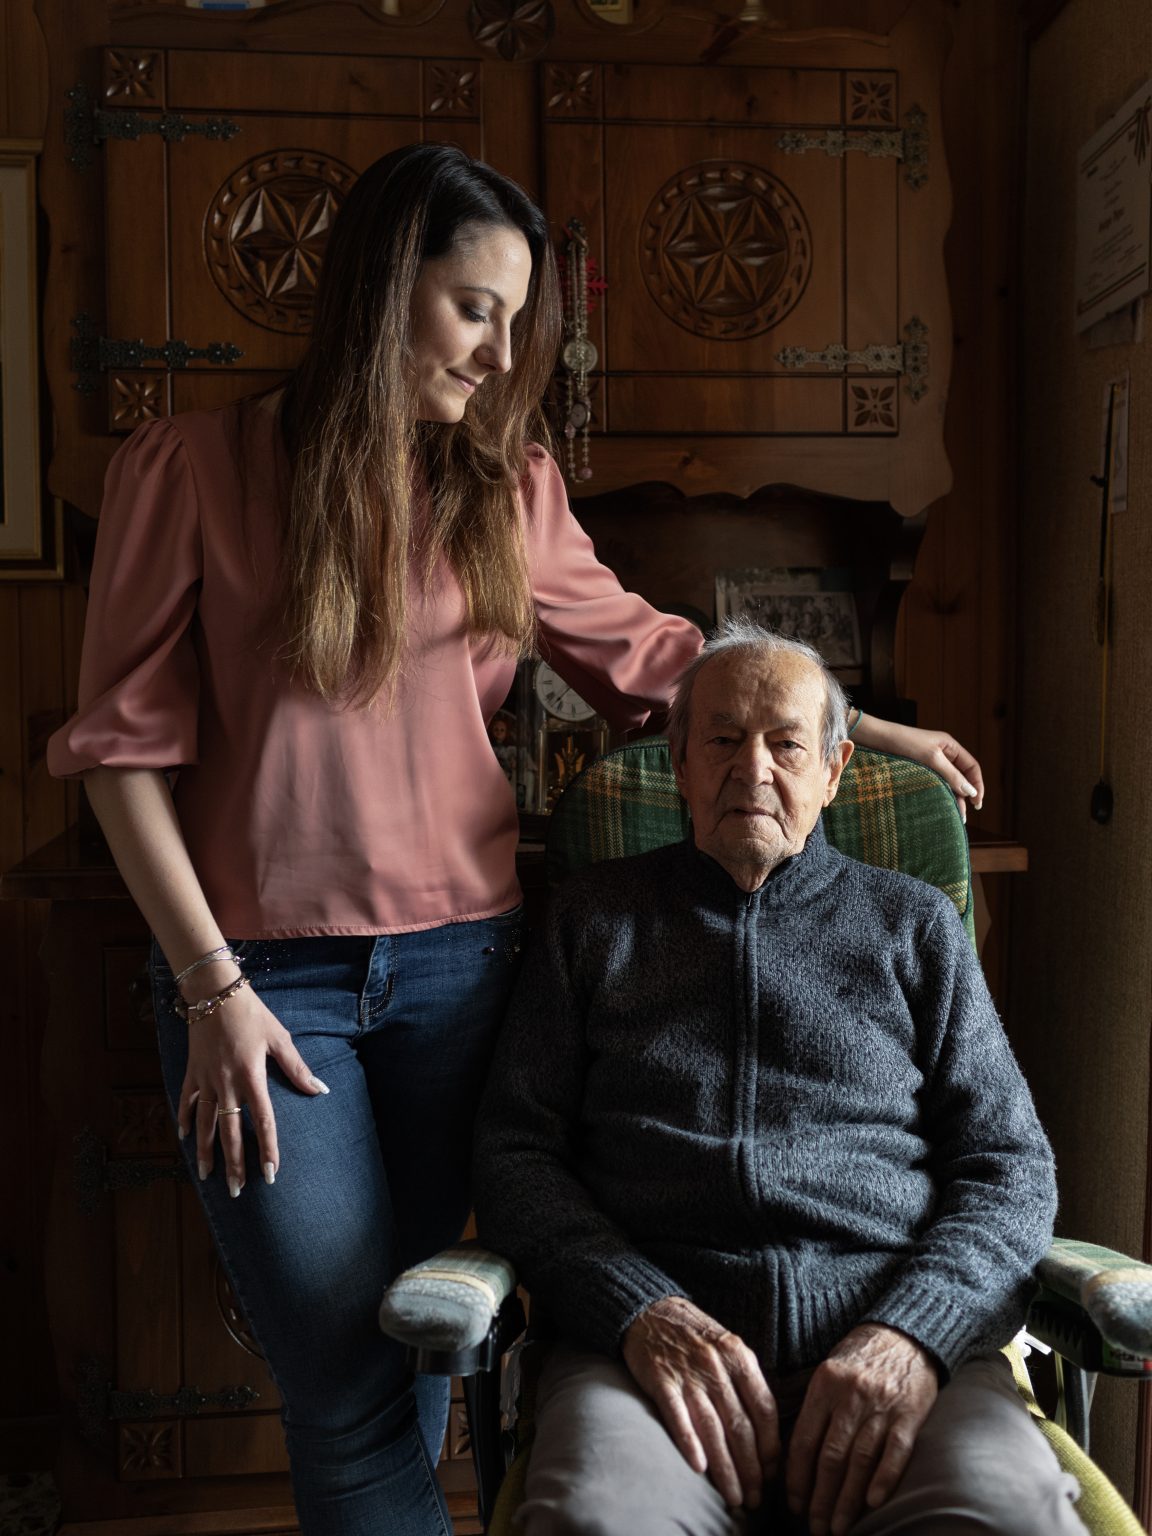 Giorgio, born in 1927, with his 29-year-old niece Maria Laura. At the age of 17, Giorgio joined the Val di Susa partisan group, considered one of the most important and numerous partisan groups in Italy. To this day, he is one of only two partisans still alive in the valley. Despite his age, he still paints, a passion he shares with his granddaughter Maria Laura.
Monpantero (Turin), Italy, March 2022. 

><

Giorgio, nato nel 1927, con sua nipote Maria Laura di 29 anni. Giorgio, alletà di 17 anni, entra nel gruppo dei partigiani della Val di Susa, considerato uno dei gruppi partigiani più importanti e numerosi dellItalia. Ad oggi, è uno dei due soli partigiani ancora in vita in Valle, nonostante la sua età si dedica ancora alla pittura, una passione che condivide con sua nipote Maria Laura. 
Monpantero (Torino), Italia, marzo 2022.